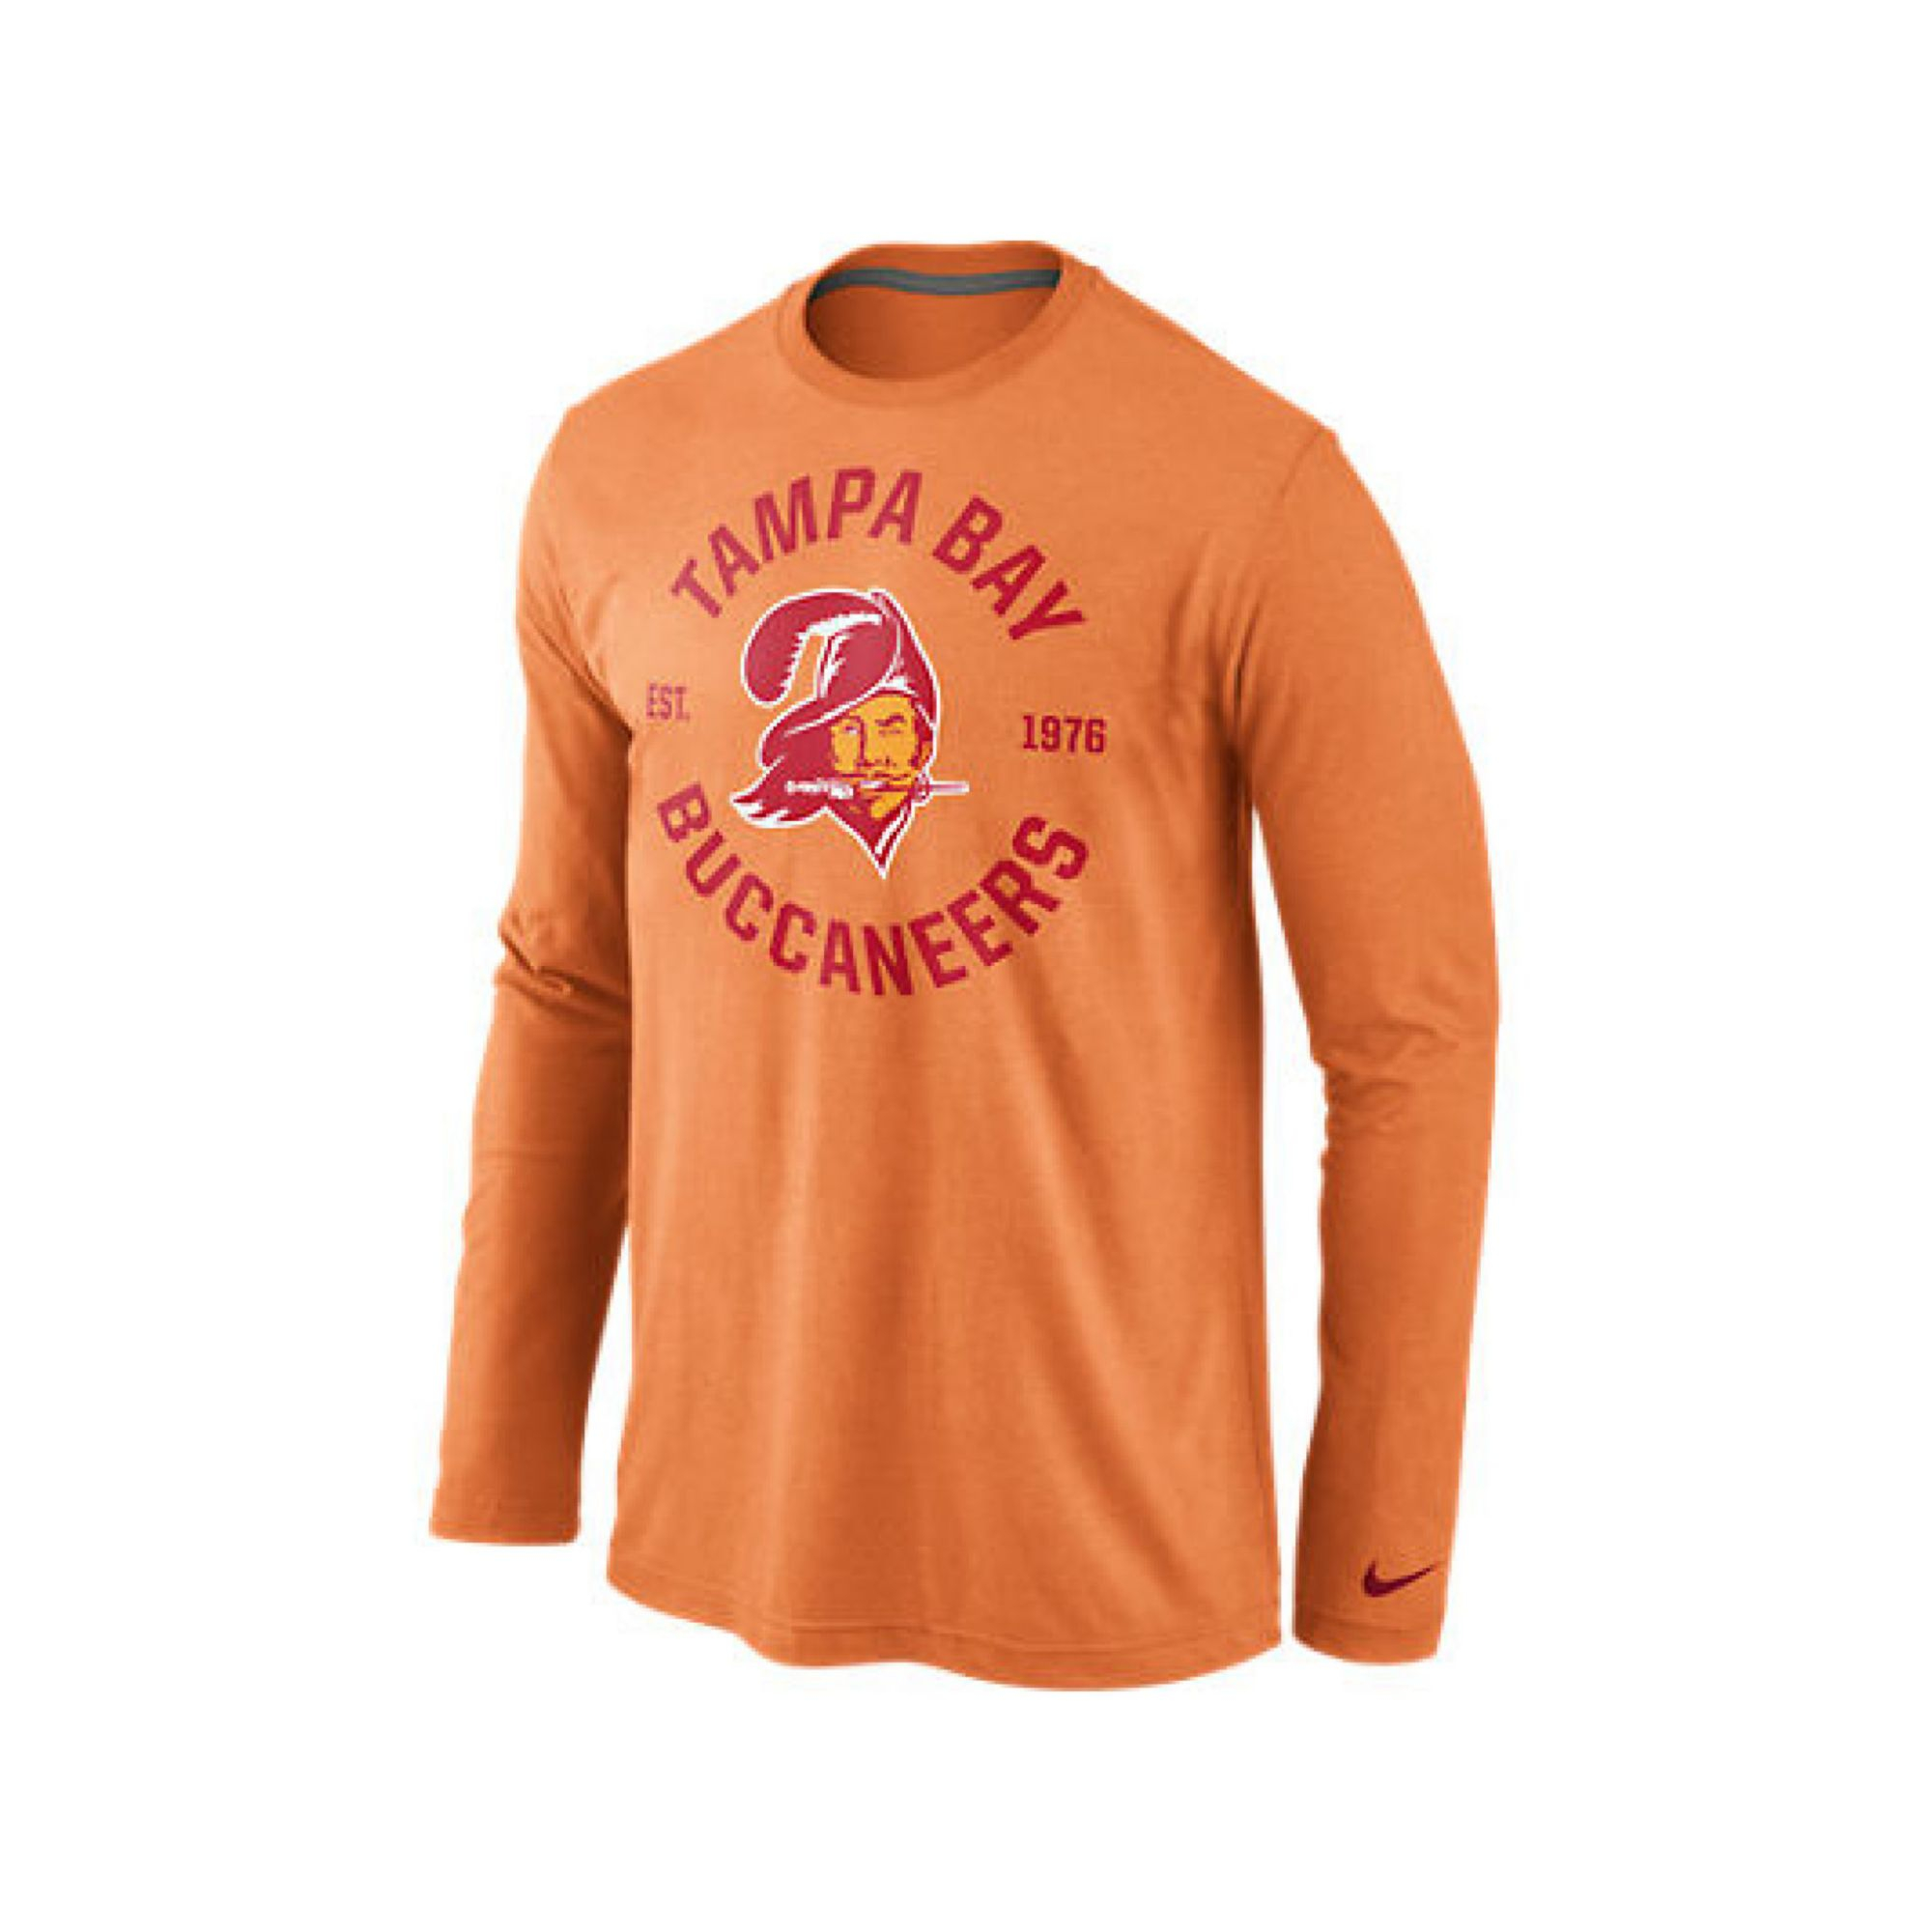 tampa bay buccaneers creamsicle t shirts - Msar Blogs Frame Store